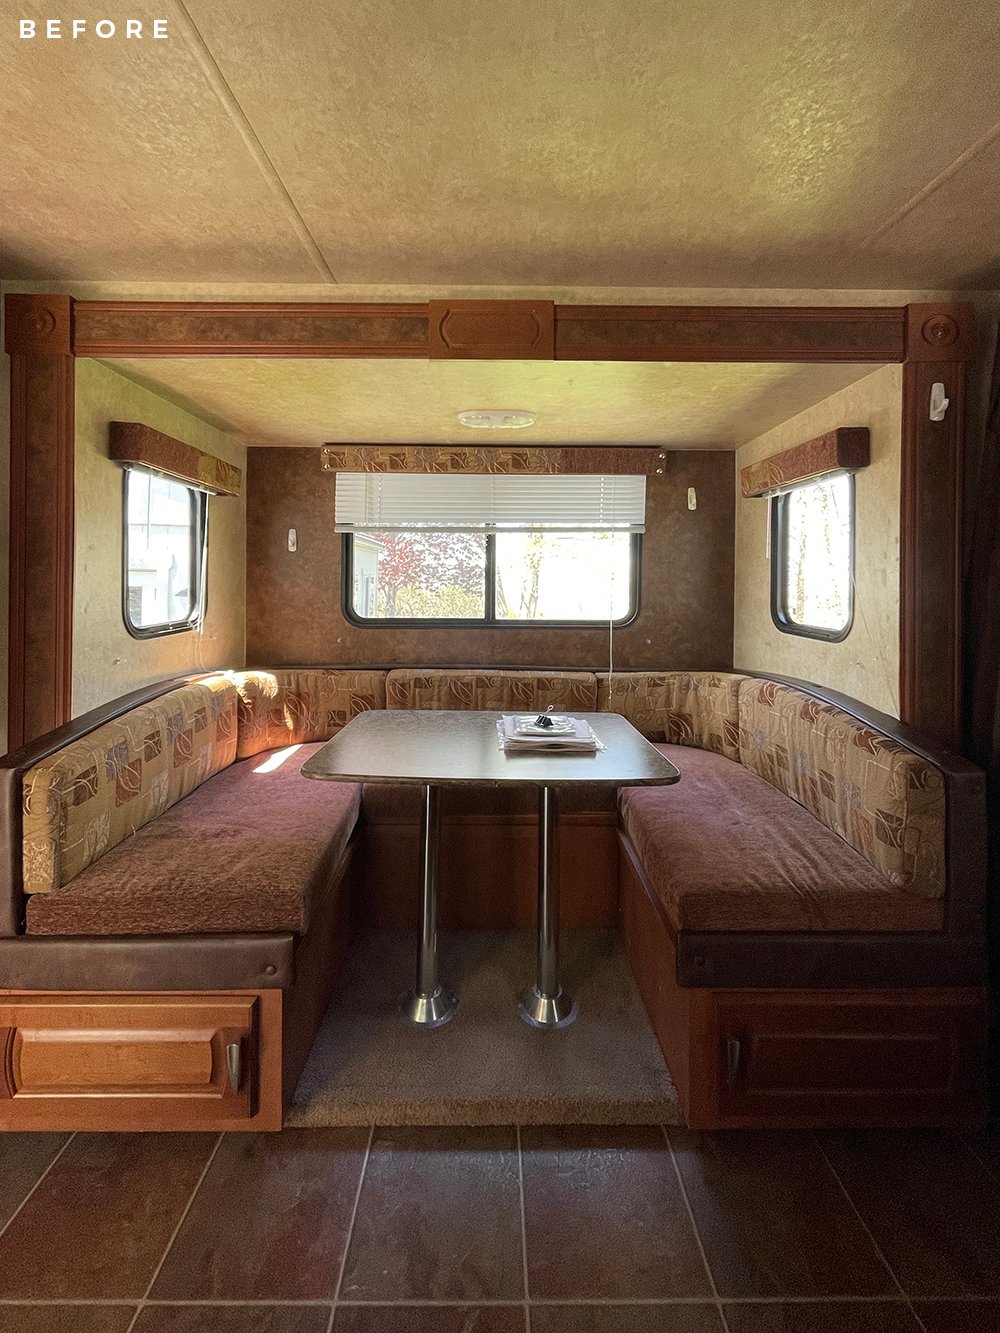 The Camper Reveal - roomfortuesday.com